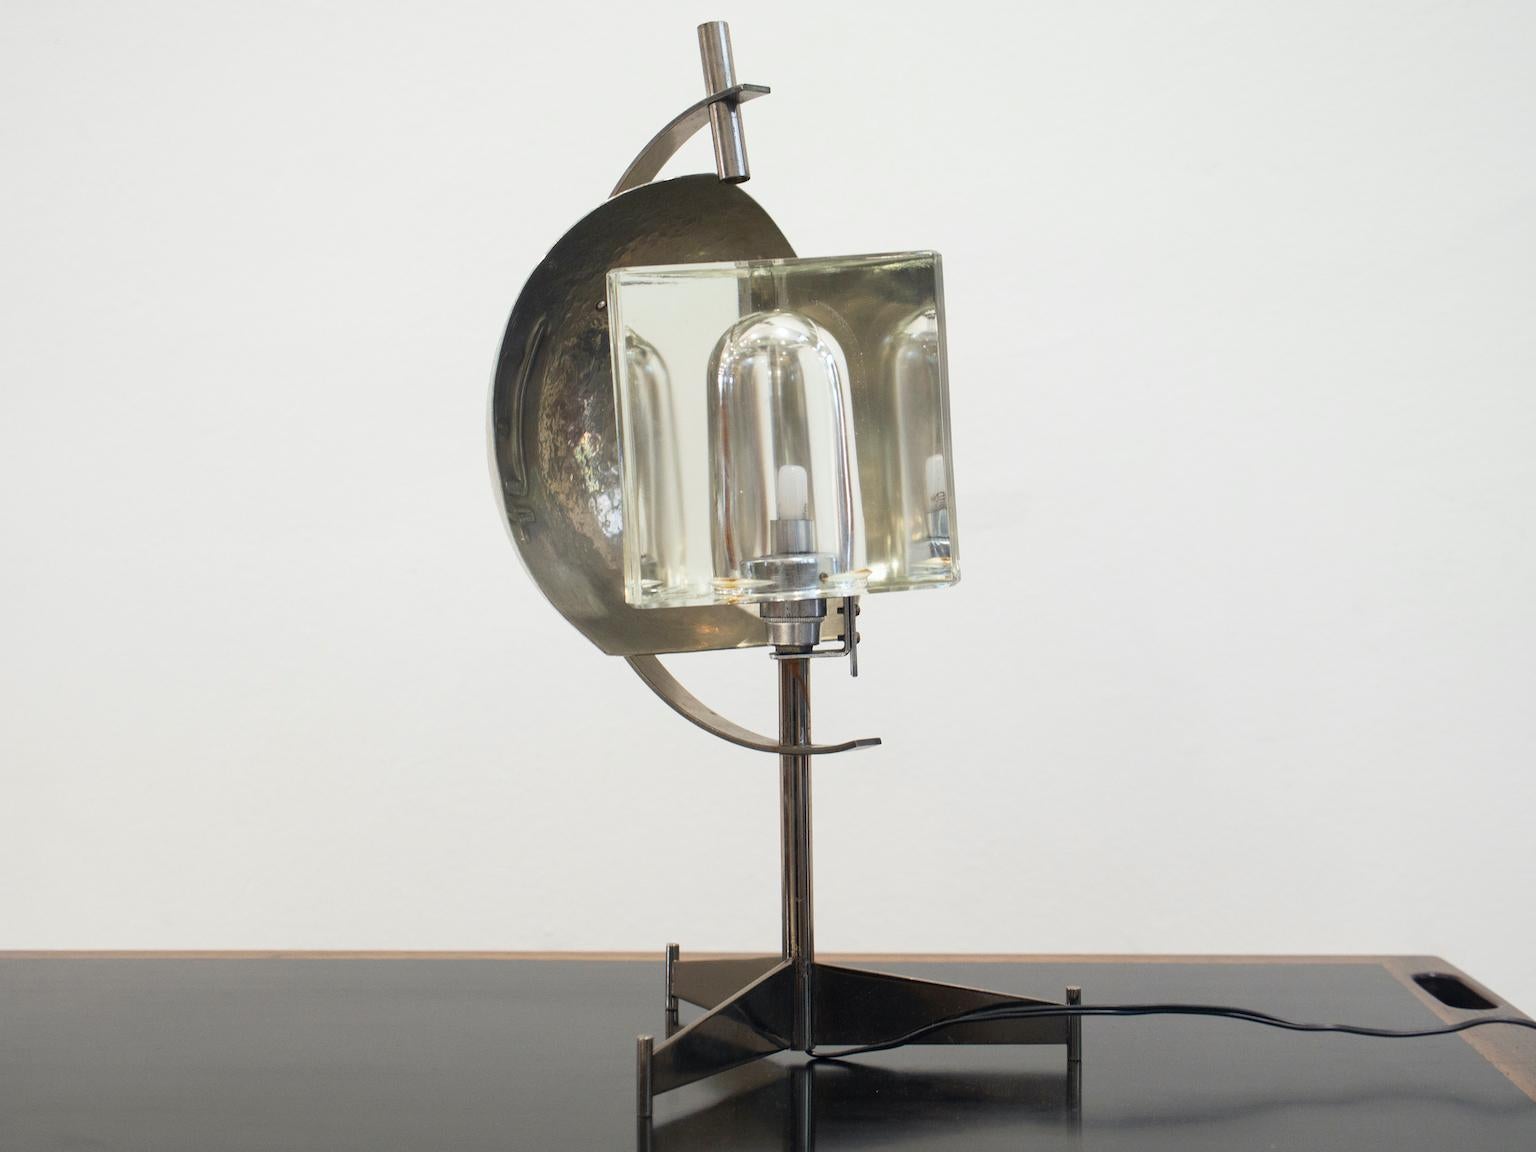 Italian Metal Table Lamp with Triangular Glass Light on Tripod Stand, 1970's For Sale